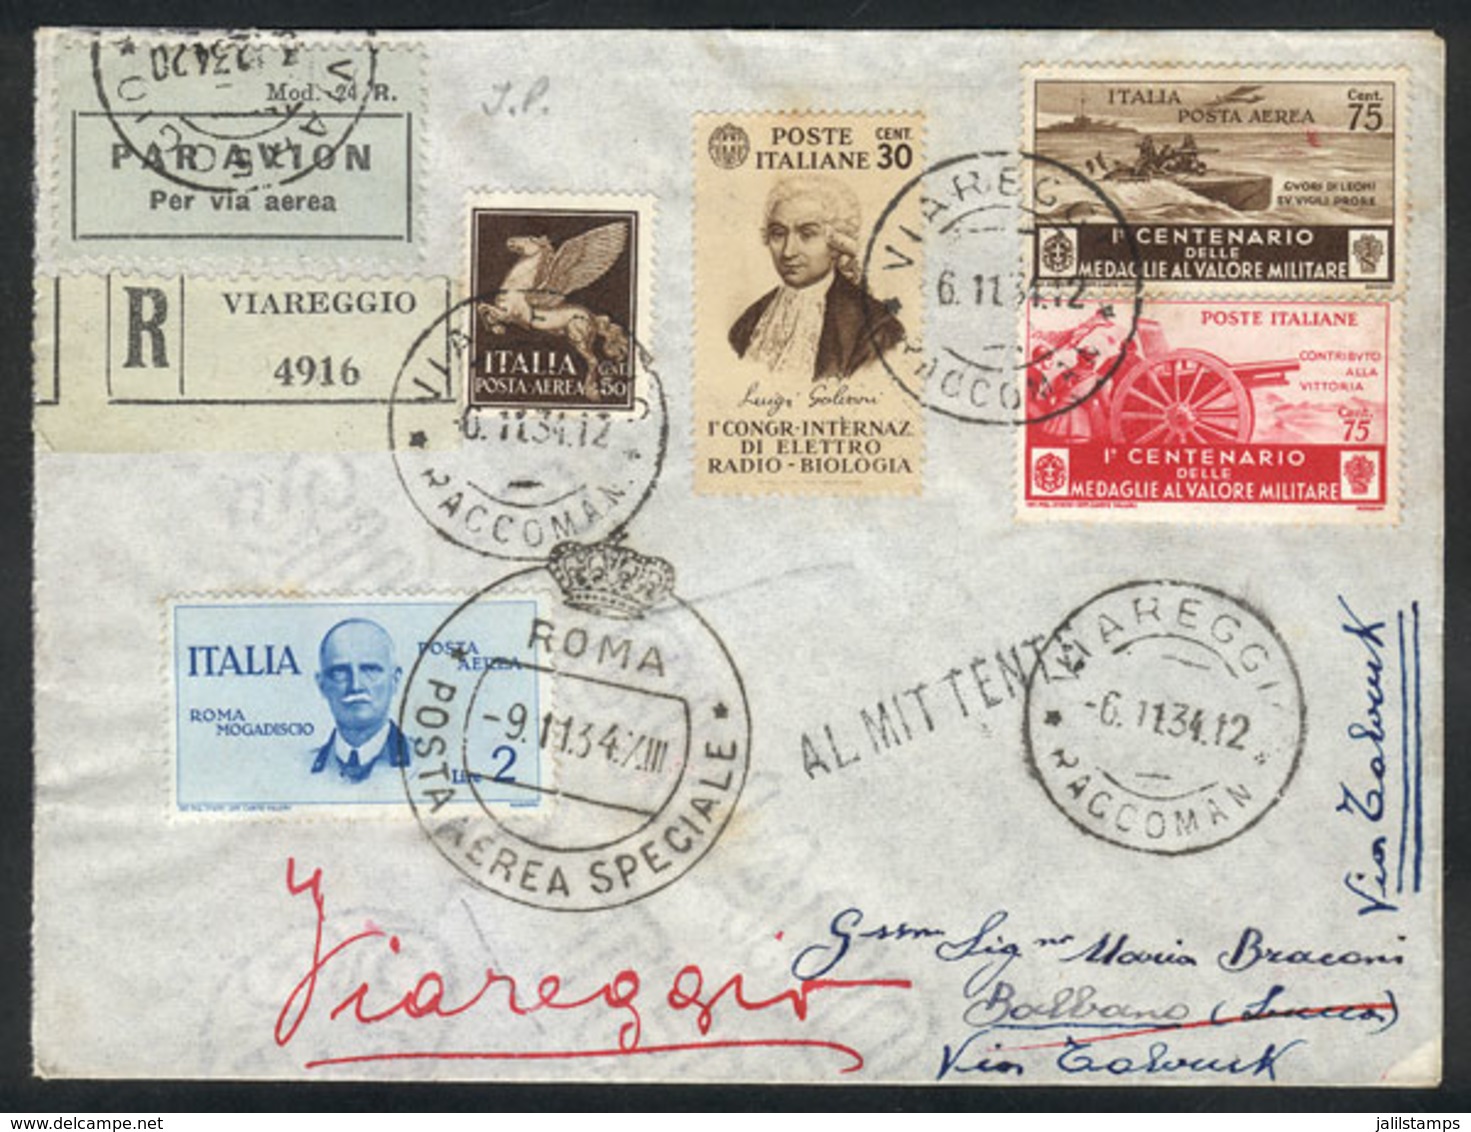 ITALY: 9/NO/1934 Roma - Tobruk: First Airmail By Ala-Littoria, Cover With Special Handstamp And Arrival Mark, Excellent  - 1. ...-1850 Prefilatelia